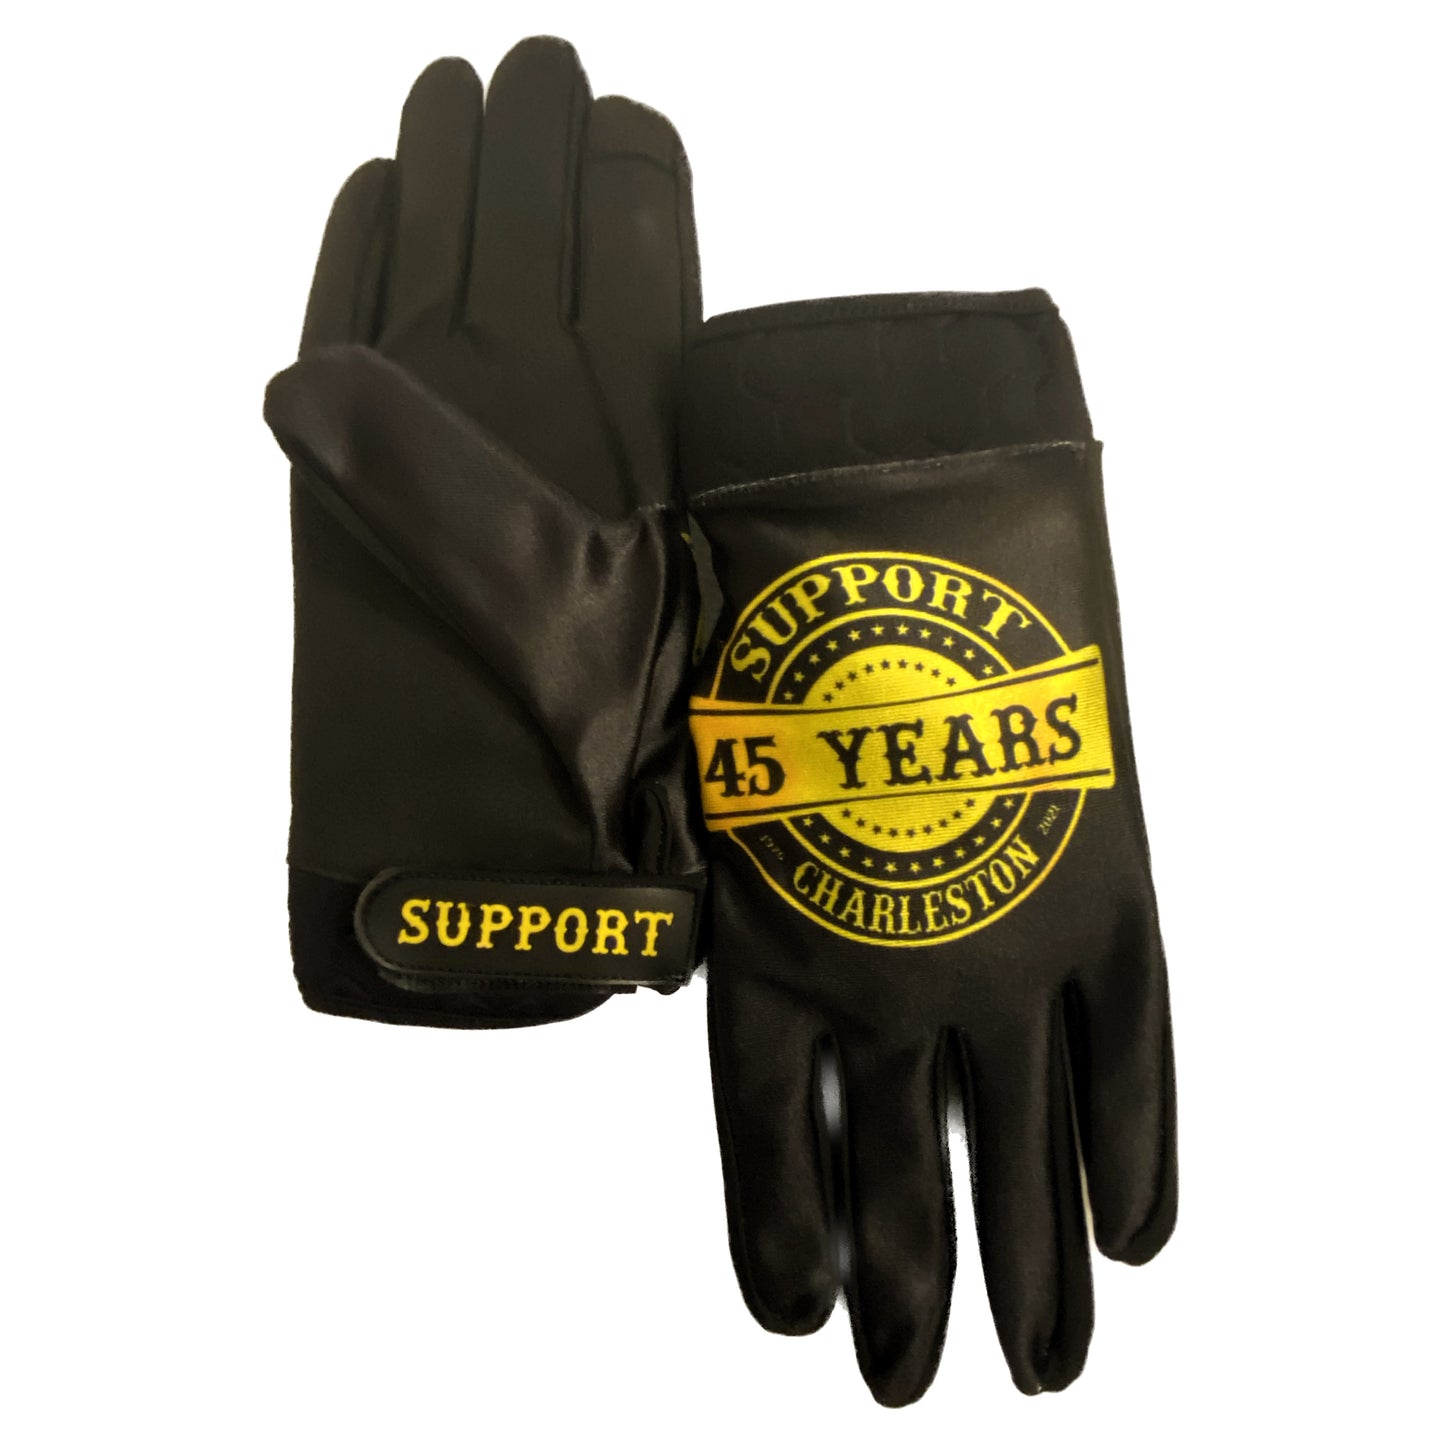 Limited Edition 45th Anniversary Gloves